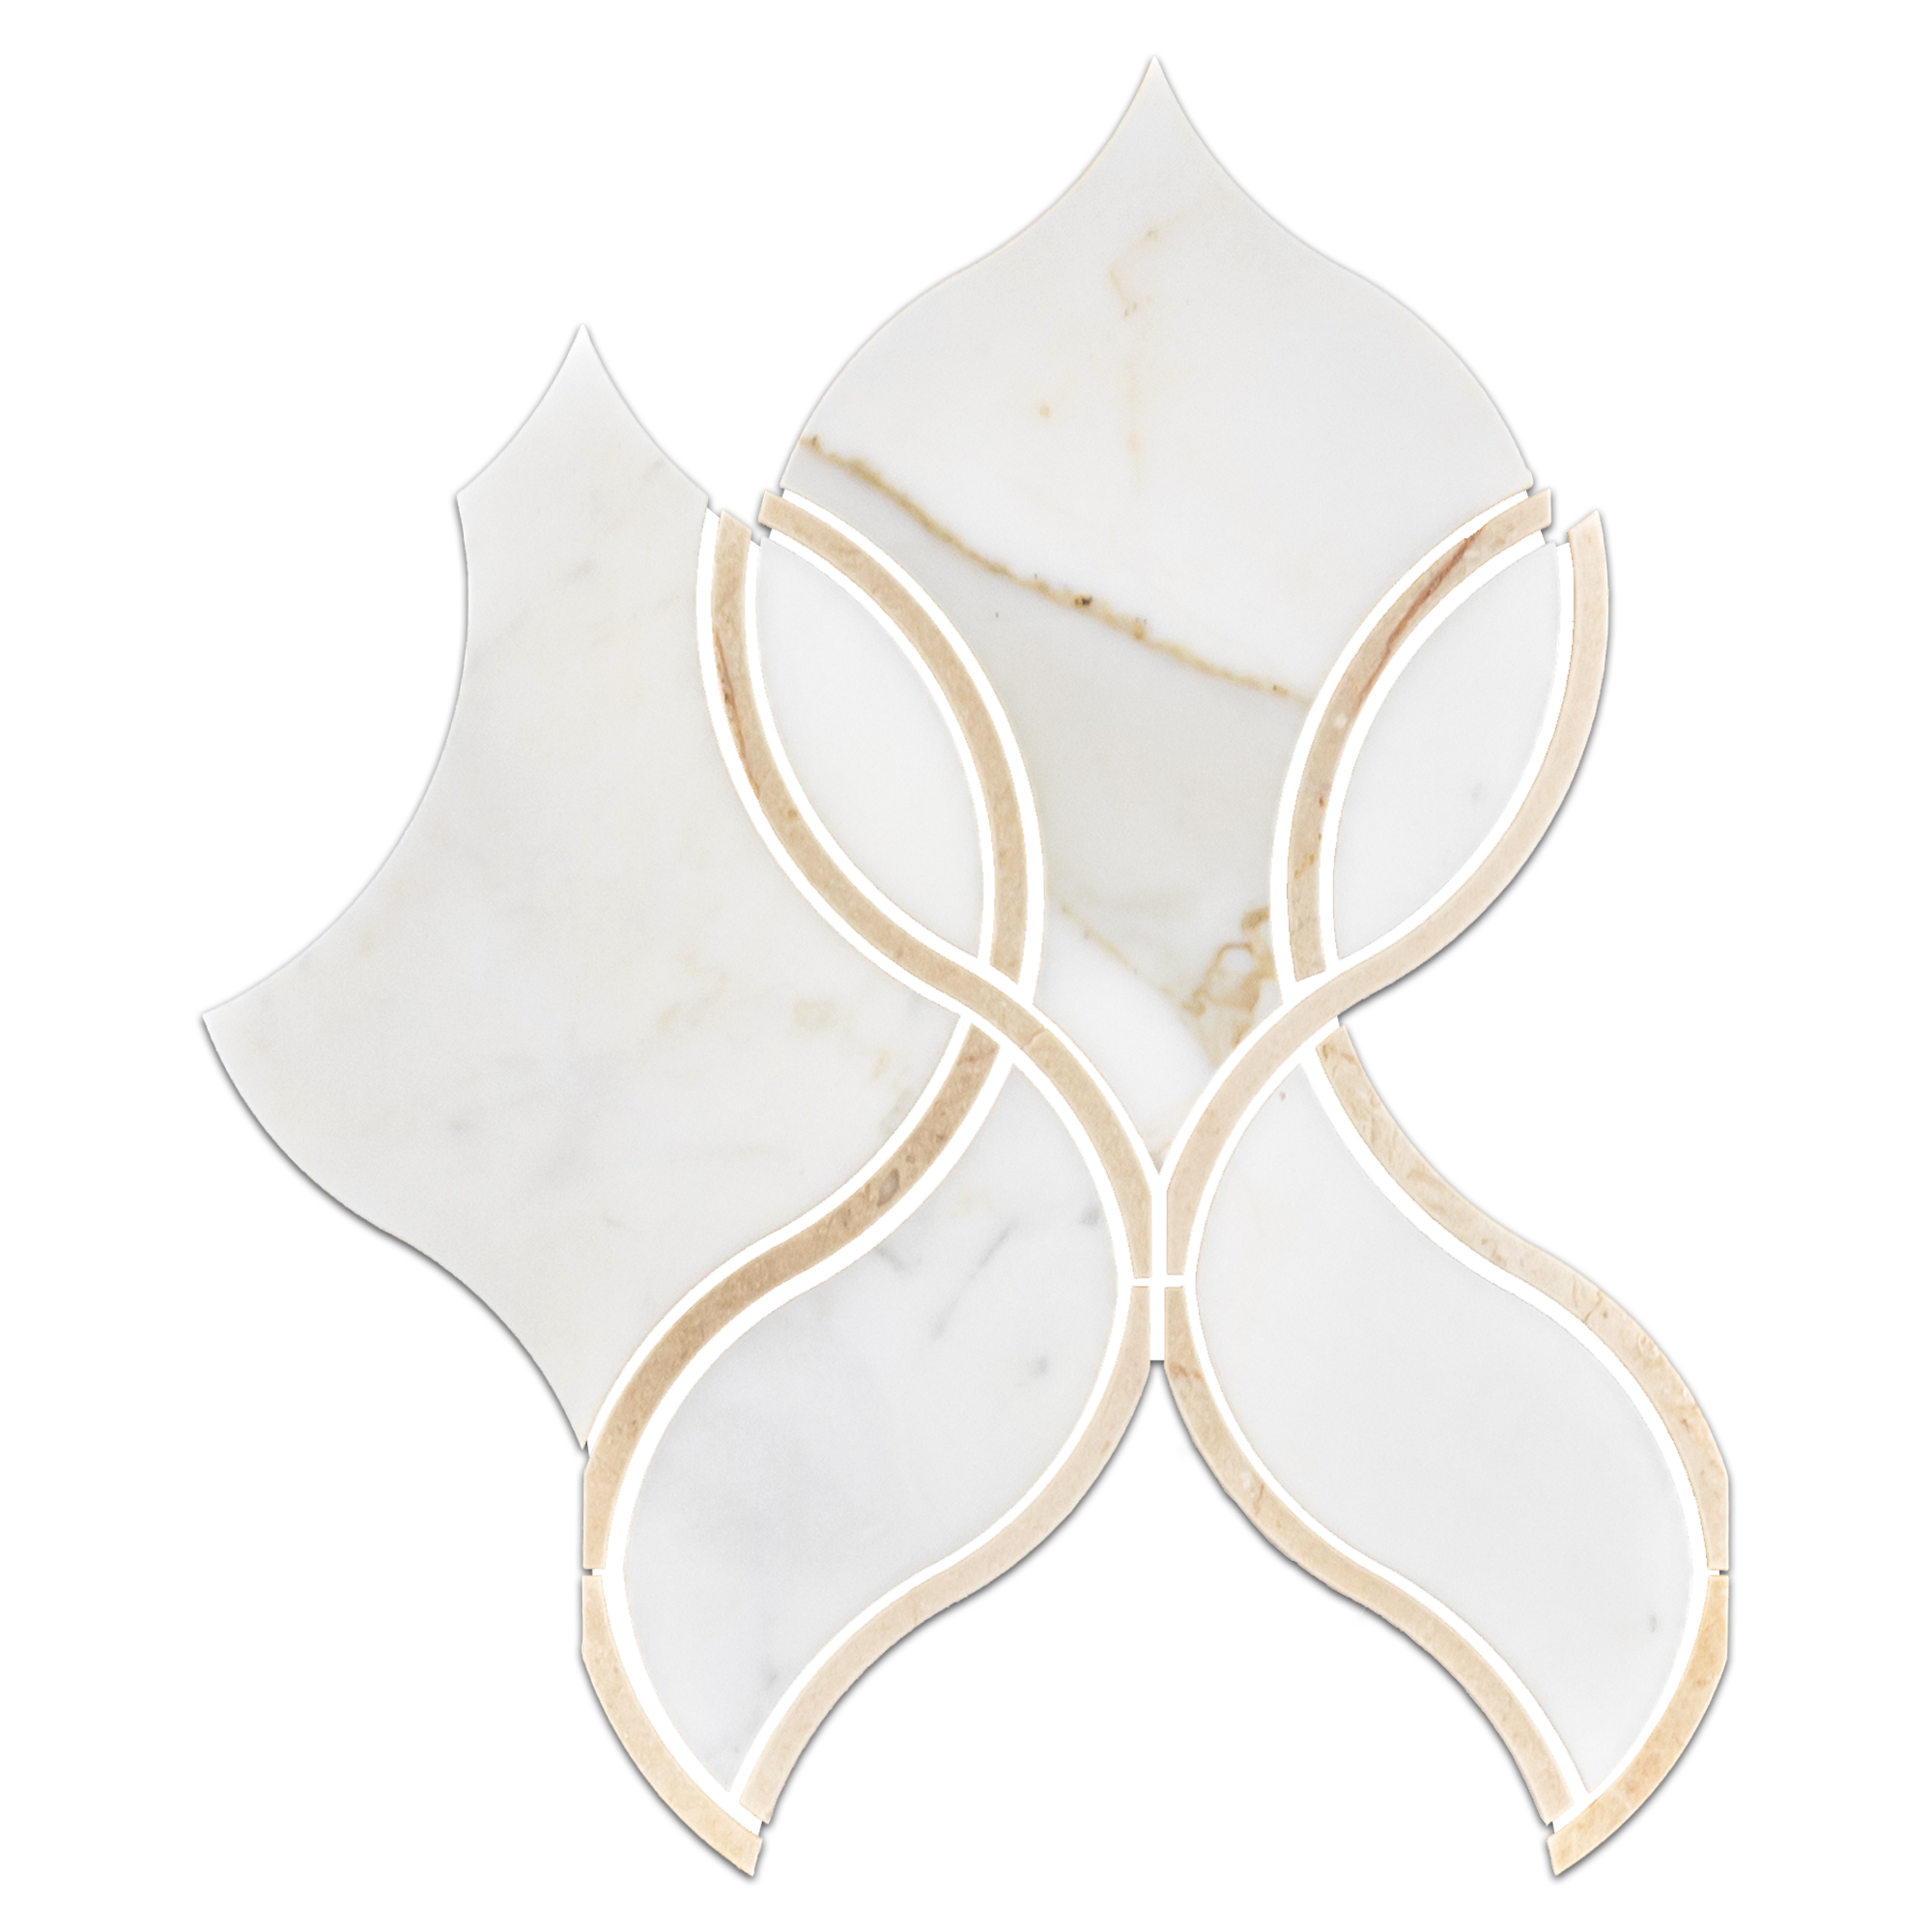 Alt text: "Elon Calacatta Gold and Crema Marfil Marble Tulip Field Mosaic Tile, 7.75x8.875 inches, honed finish, for elegant wall and floor designs."